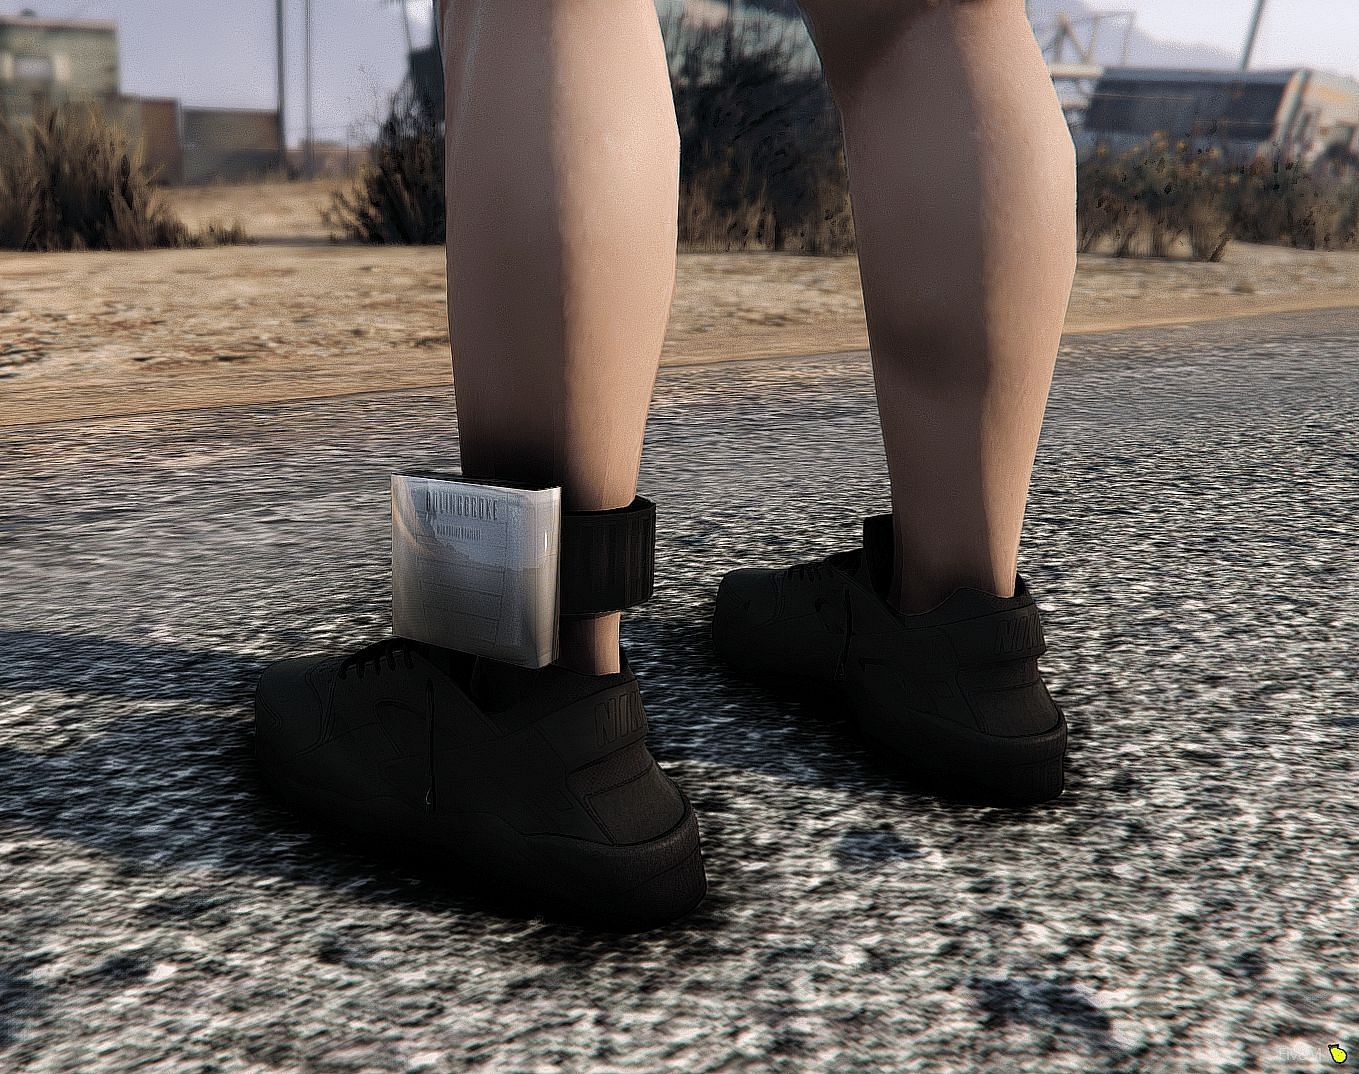 Immersion is the key aspect when it comes to RP (Image via GTA5 mods)